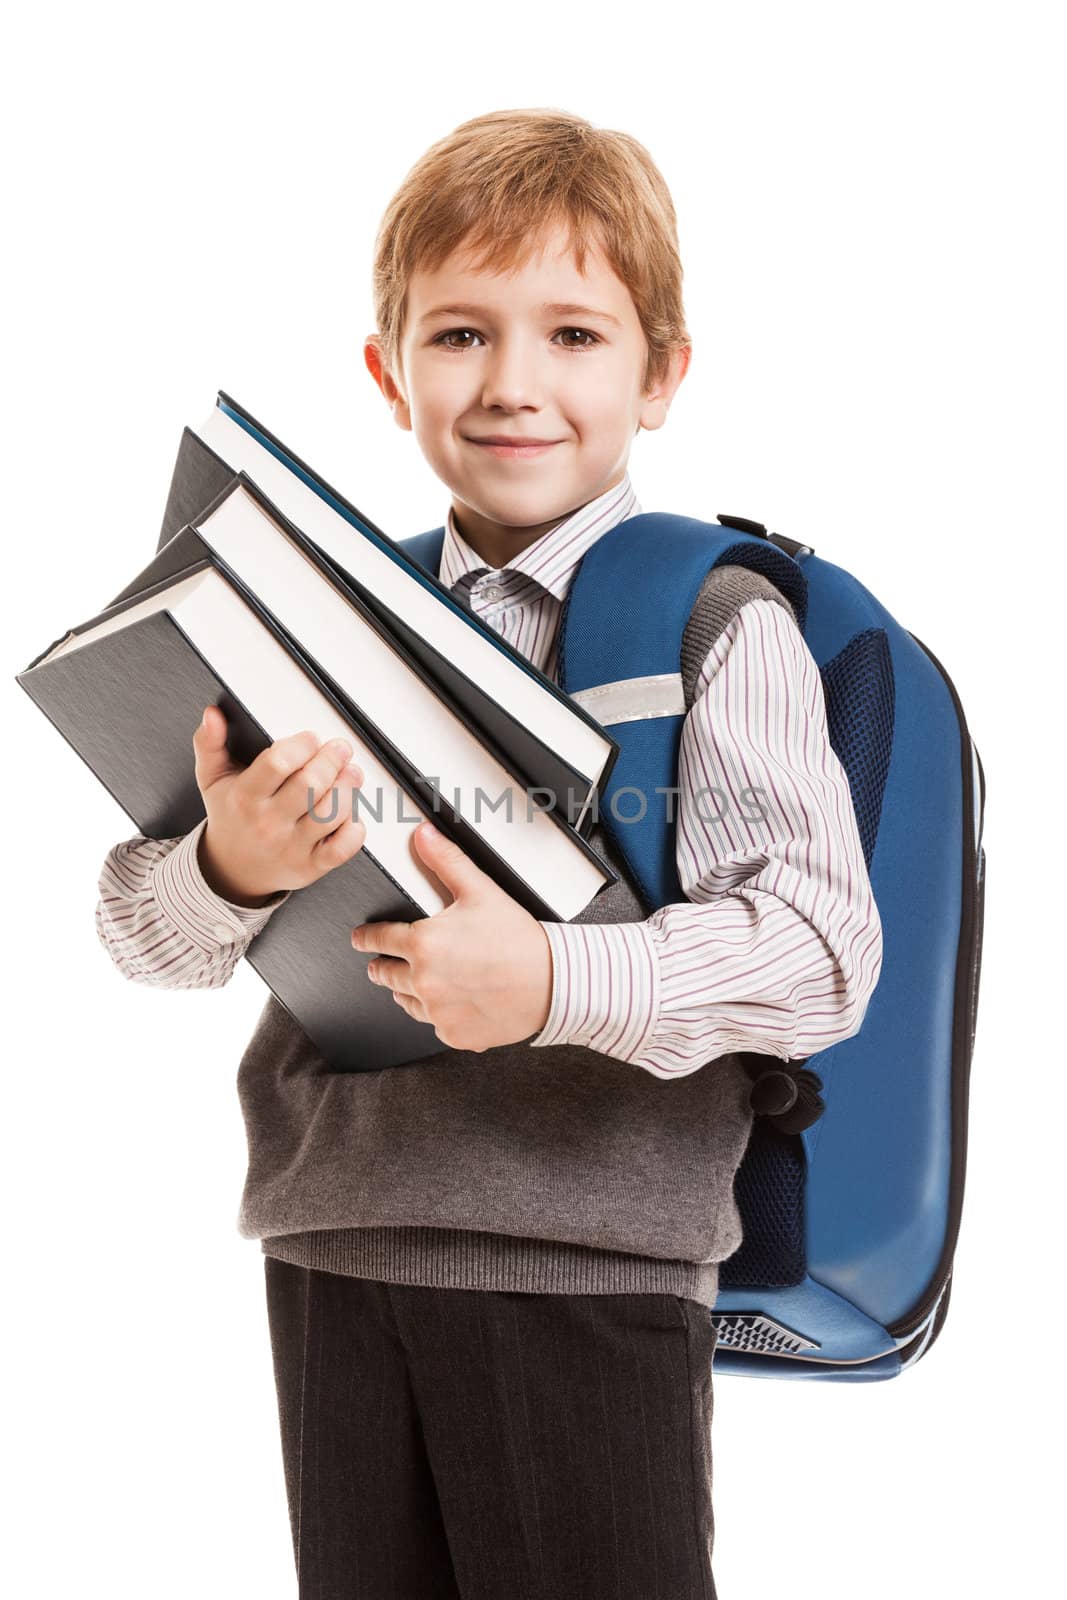 Schoolboy with backpack holding books by ia_64